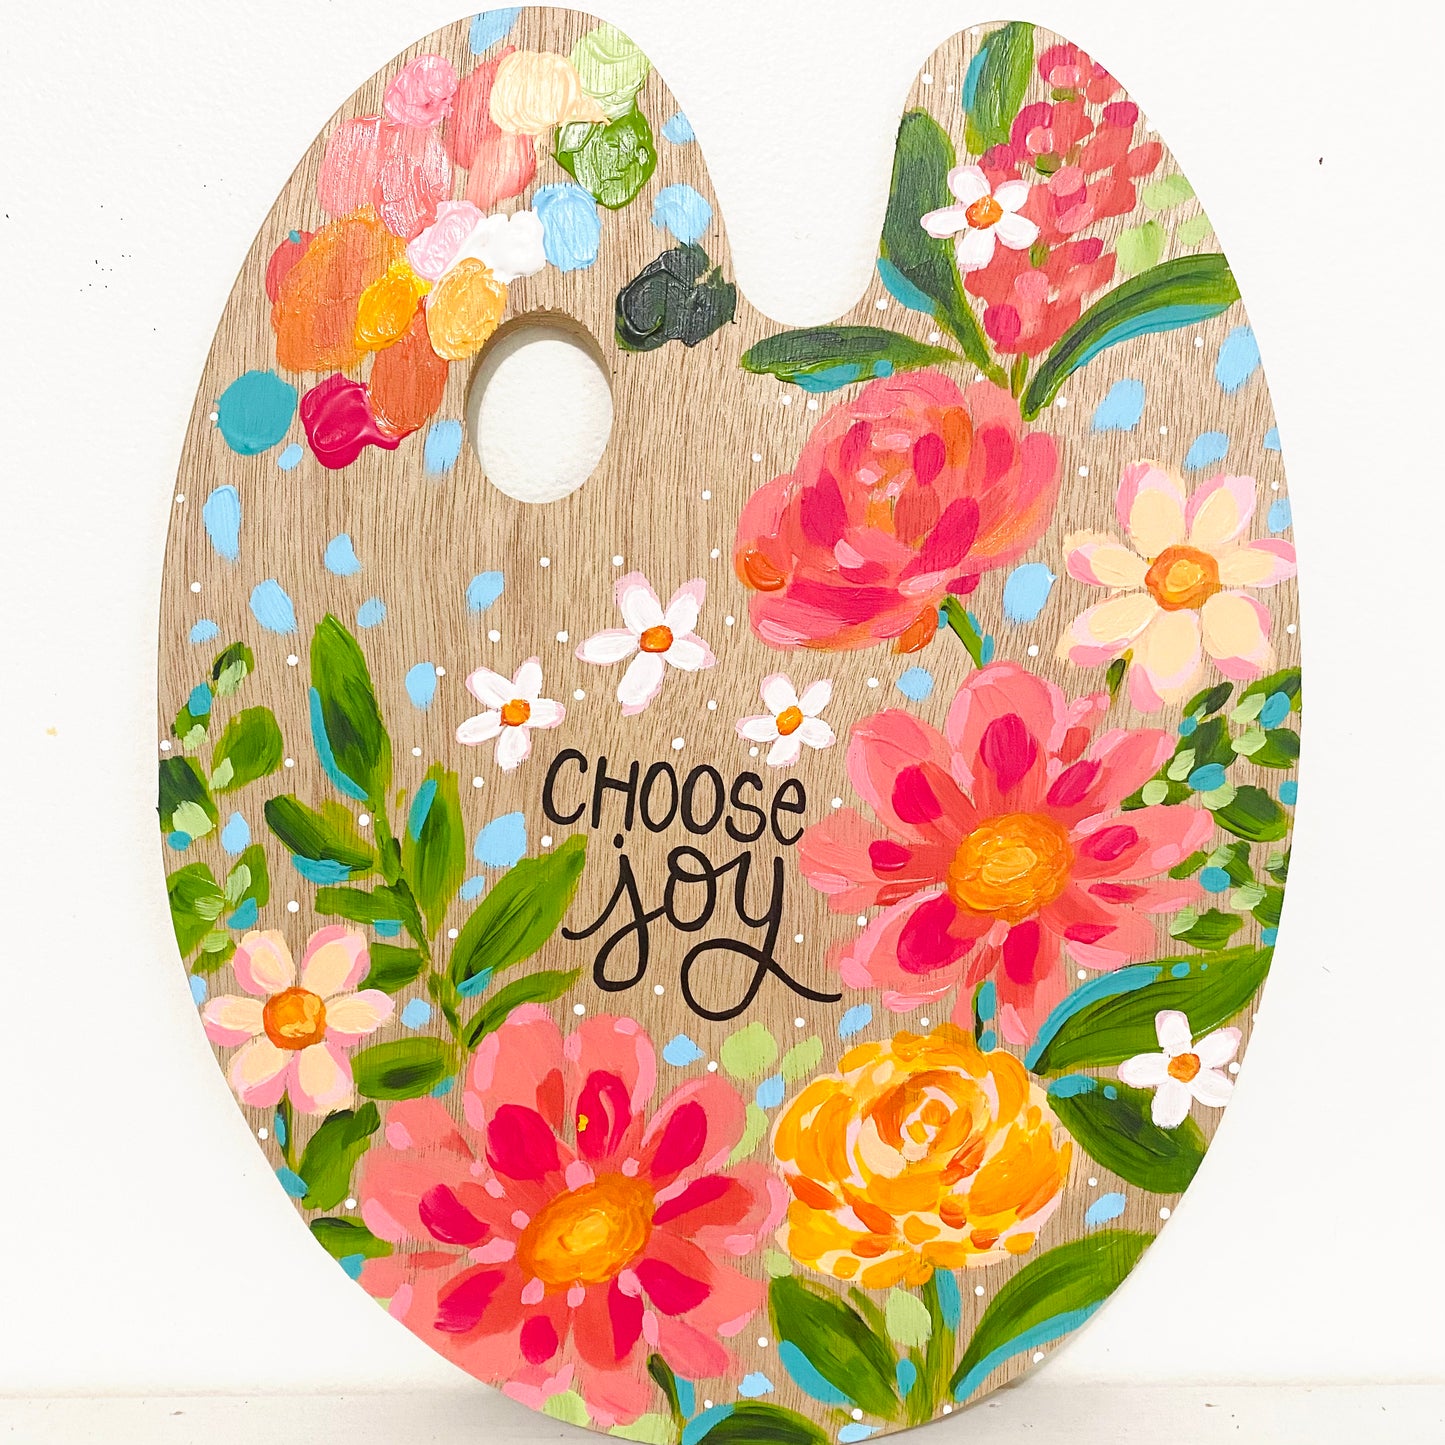 August 2022 Daily Paint Palette Painting Day 14 - Choose Joy Floral